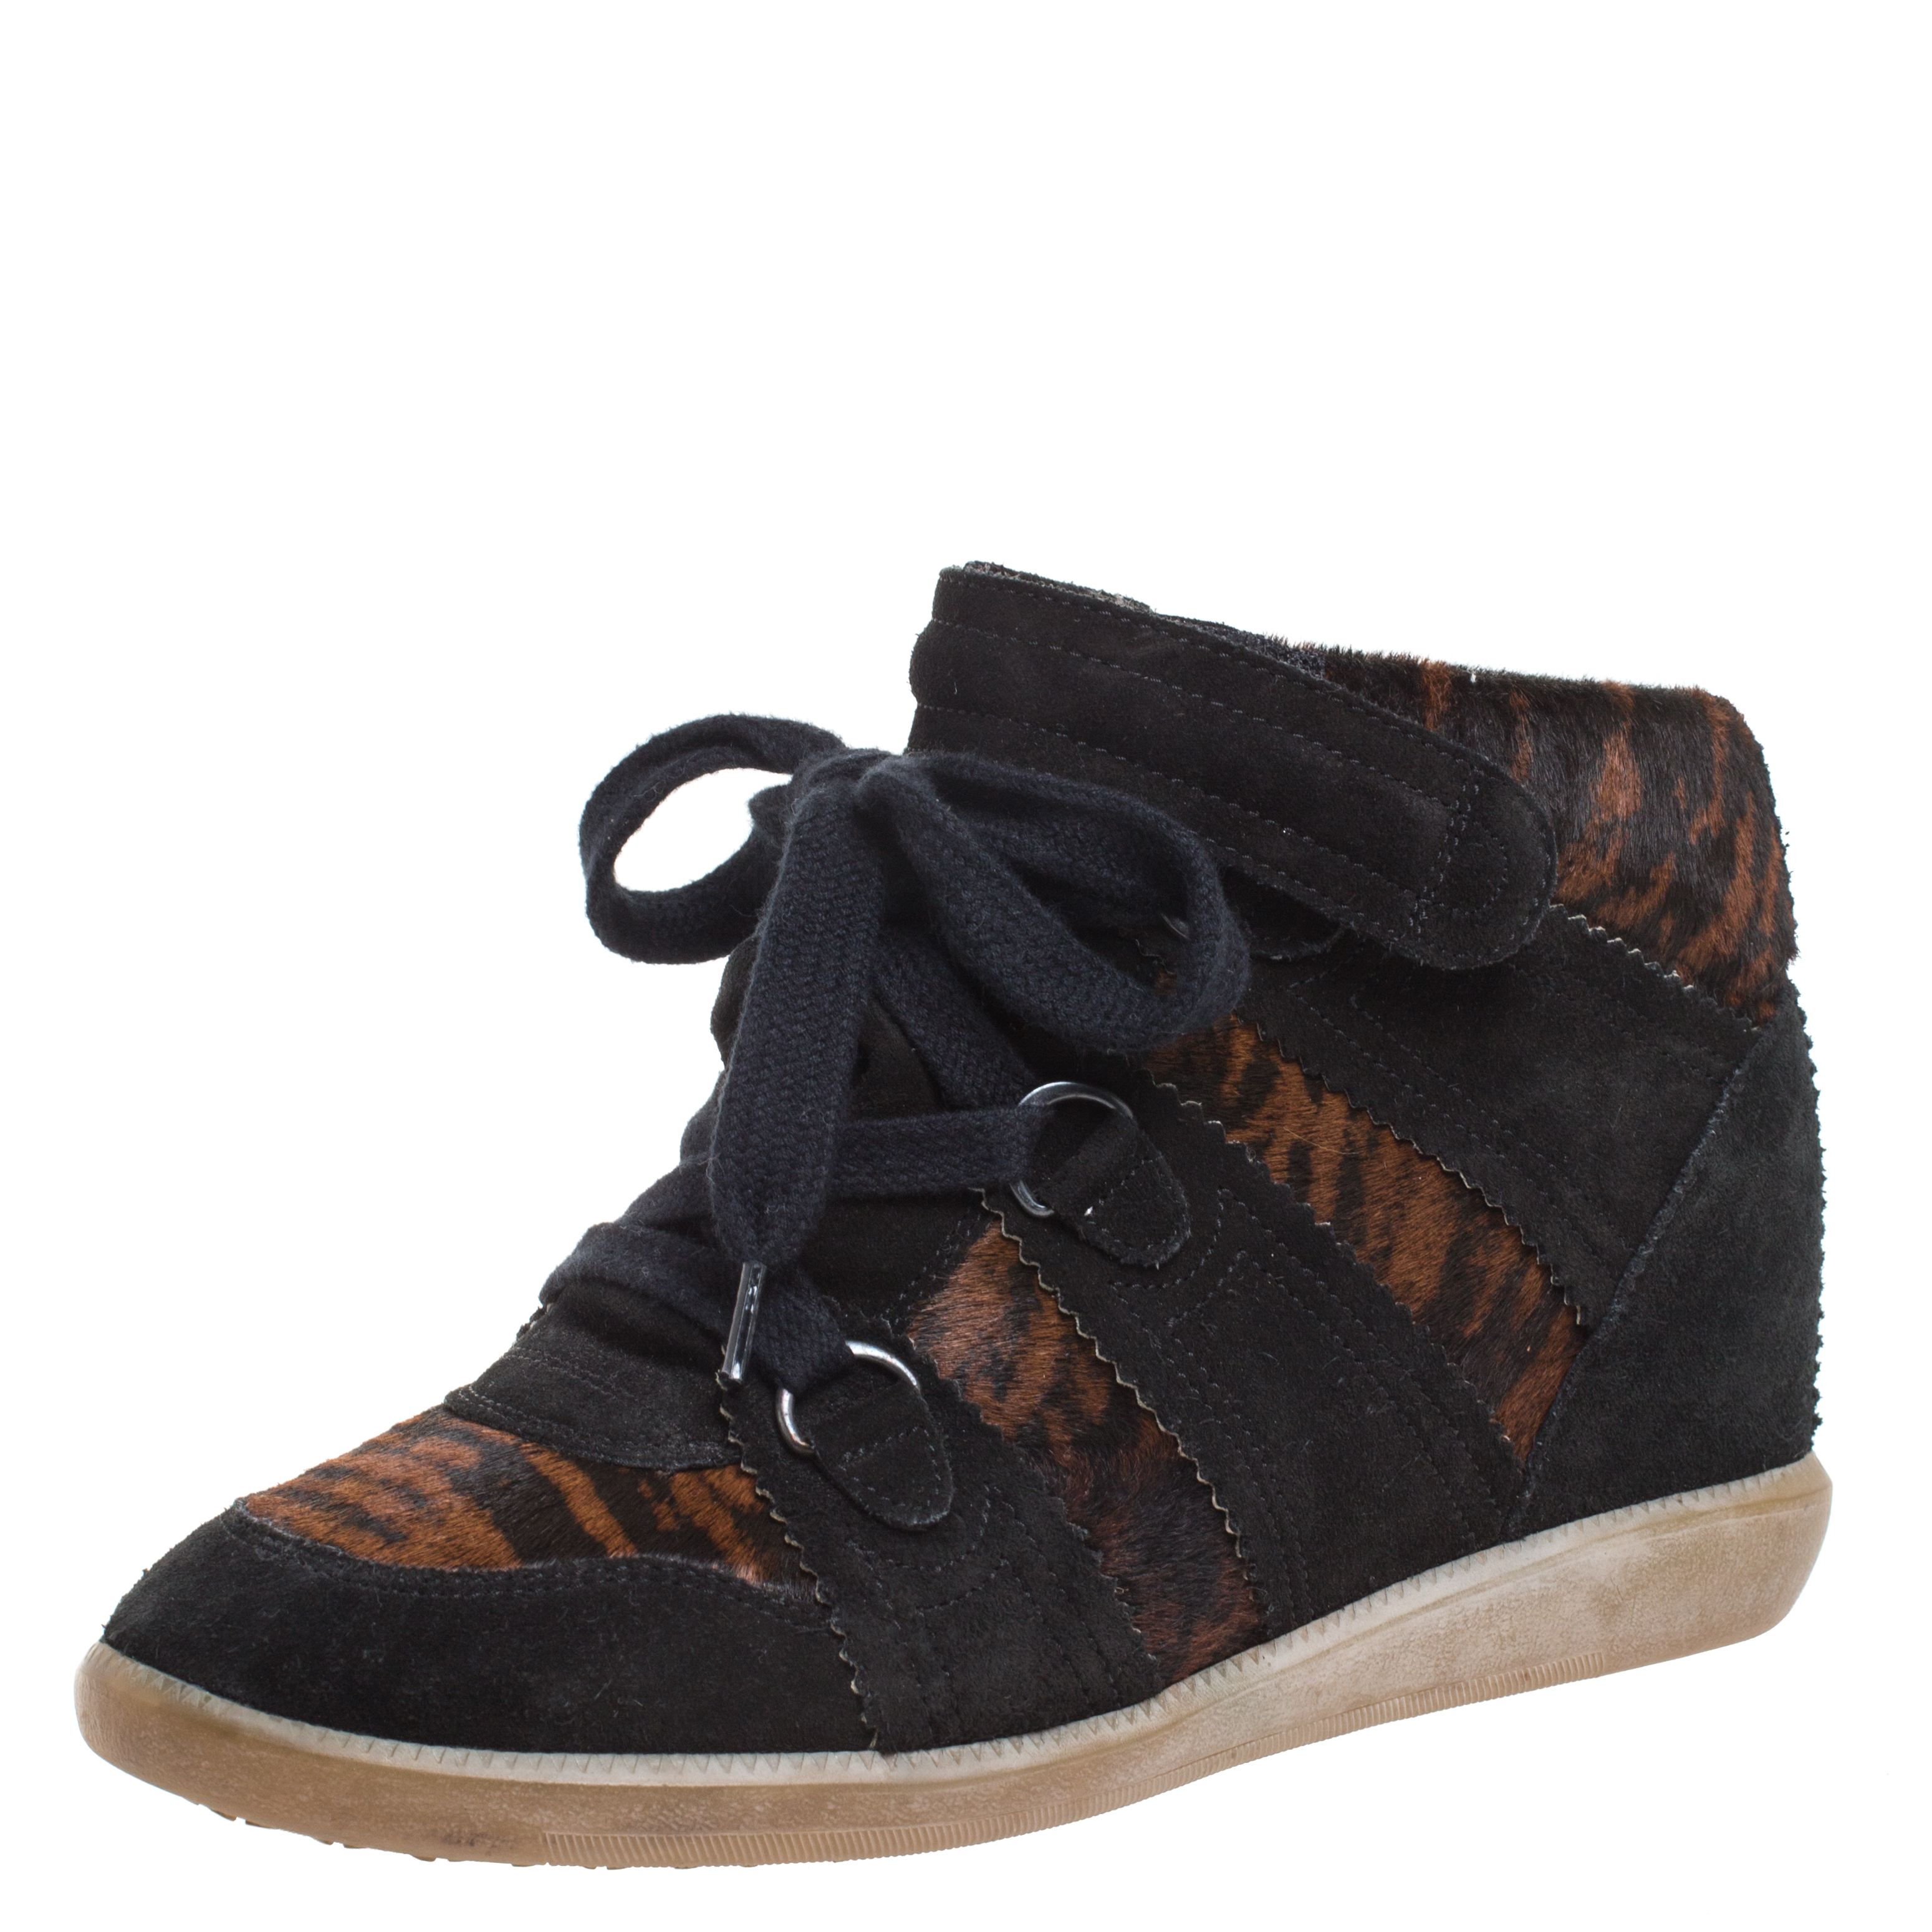 Pre-owned Isabel Marant Black Printed Ponyskin And Suede Blossom Lace Up Wedge Sneakers Size 39